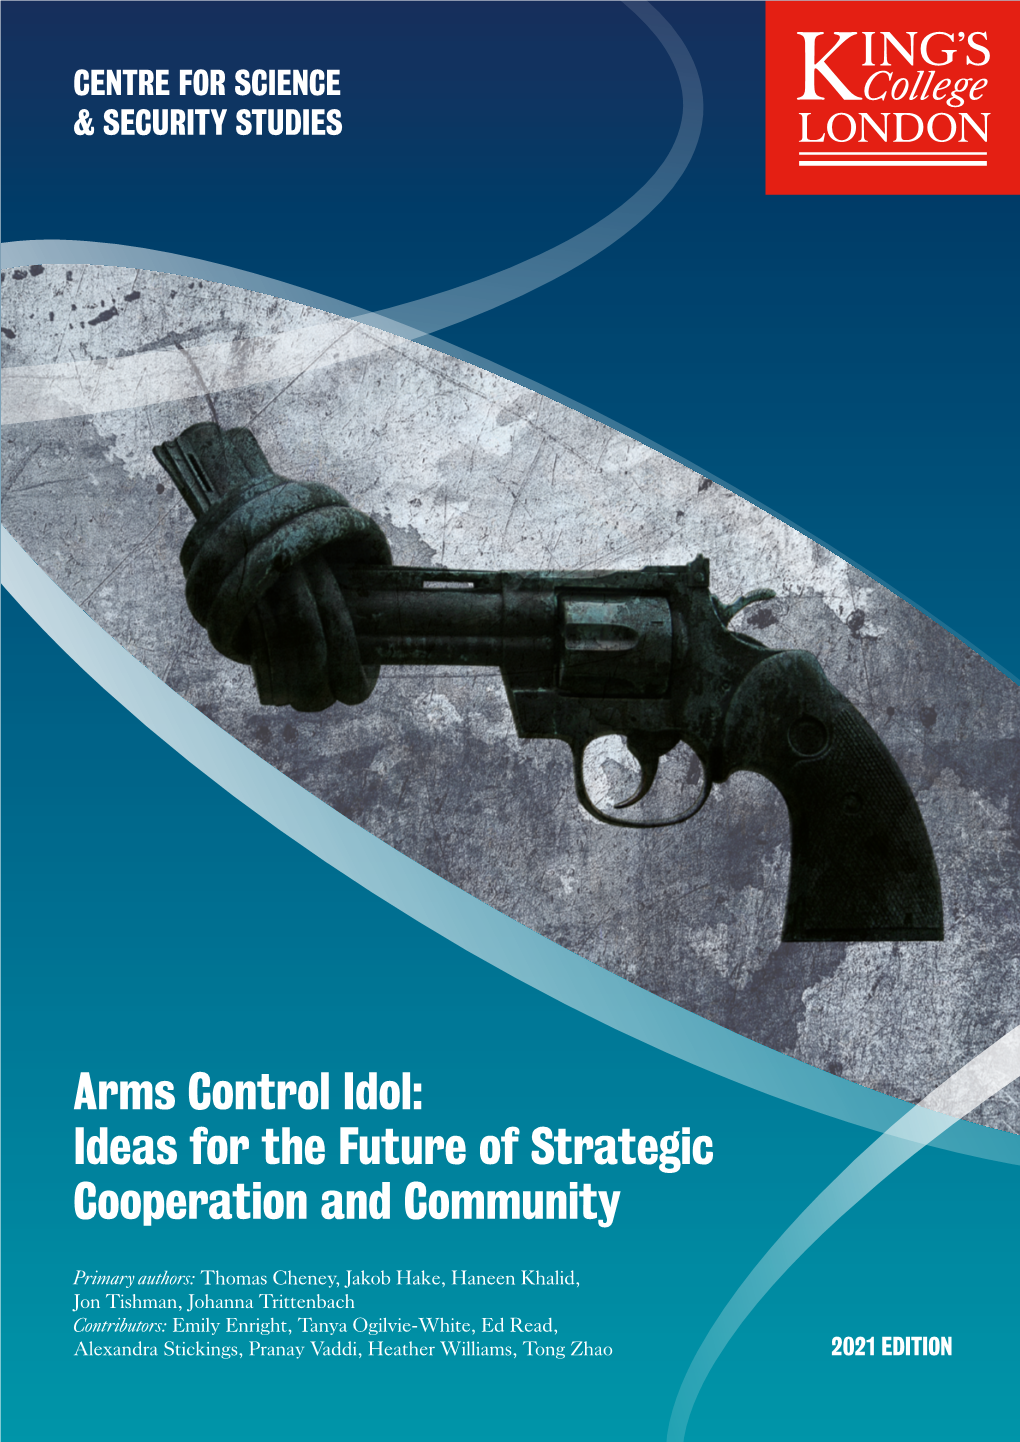 Arms Control Idol: Ideas for the Future of Strategic Cooperation and Community